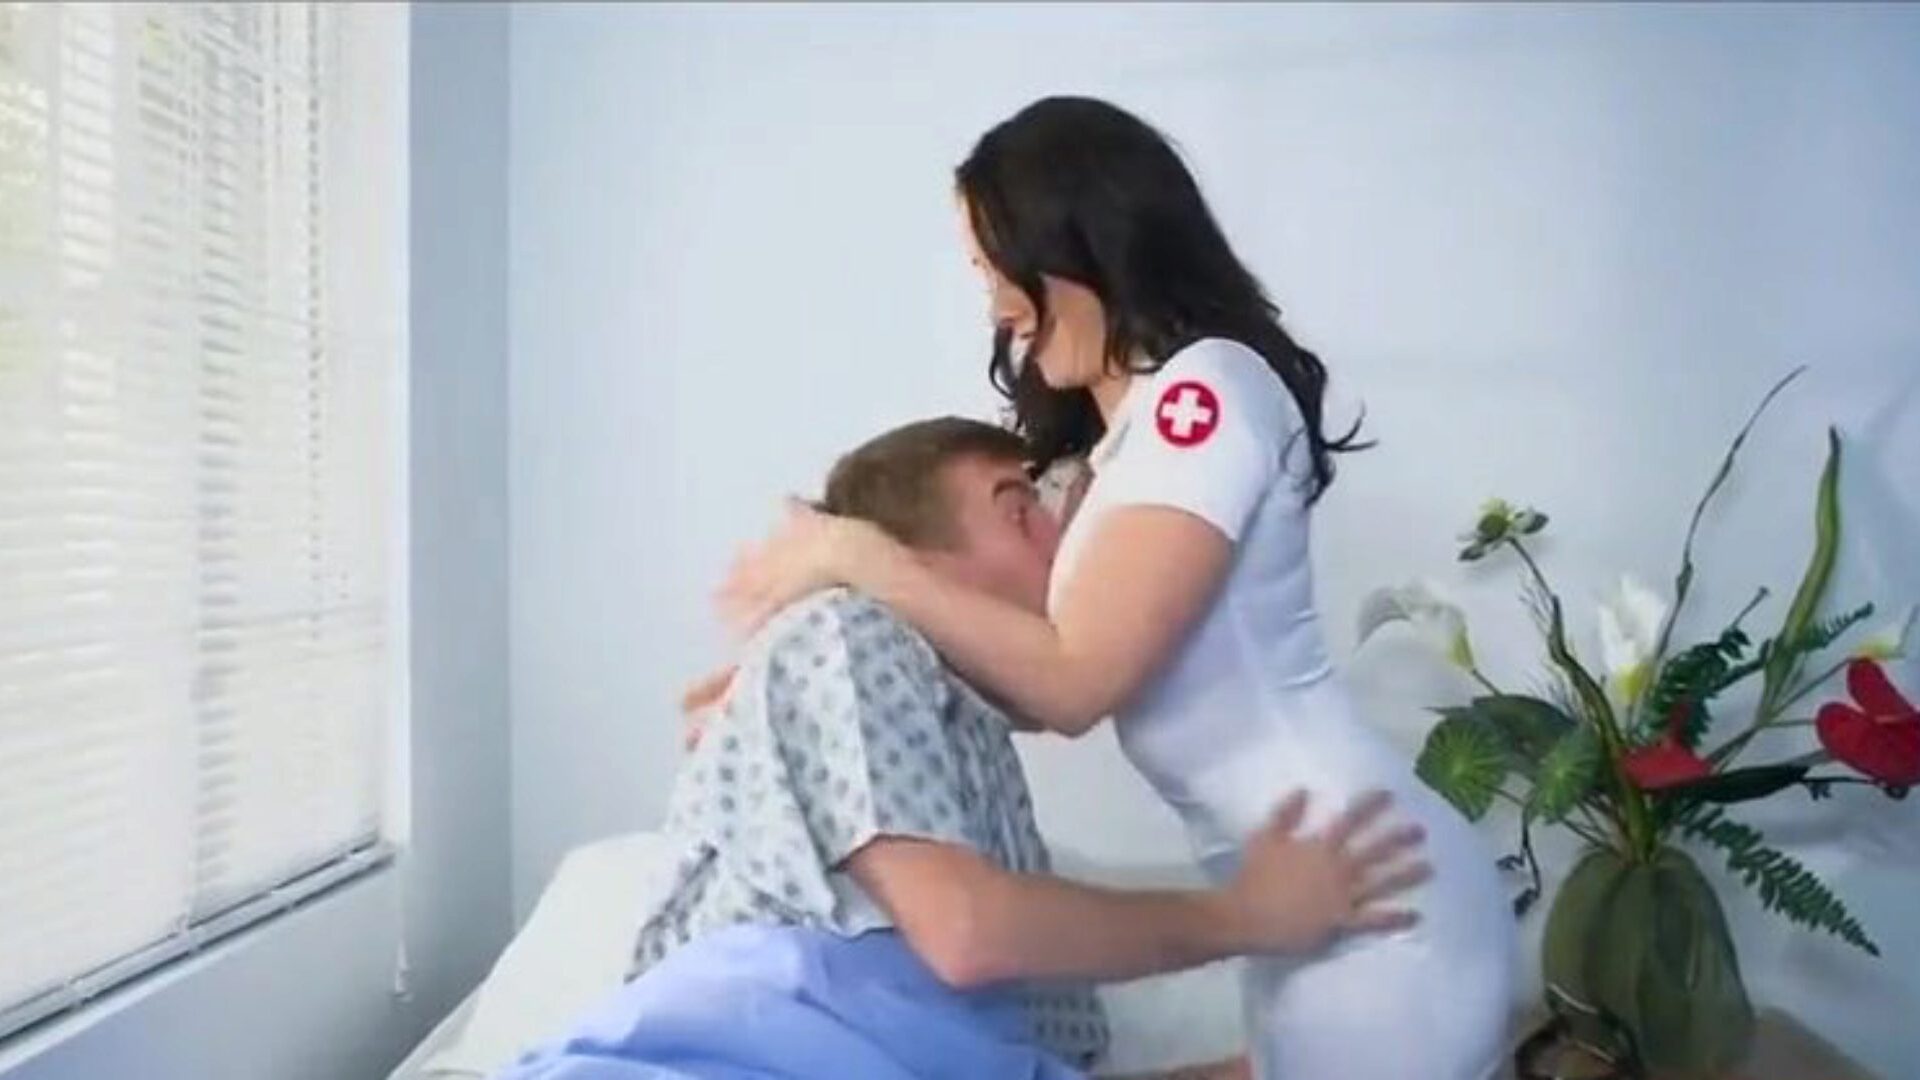 Nurses Double Team this Patient, Free HD Porn 58: xHamster See Nurses Double Team this Patient movie scene on xHamster, the biggest HD lovemaking tube web resource with tons of free Xxx Double Double Tube & Brazzers porno movie scene gigs